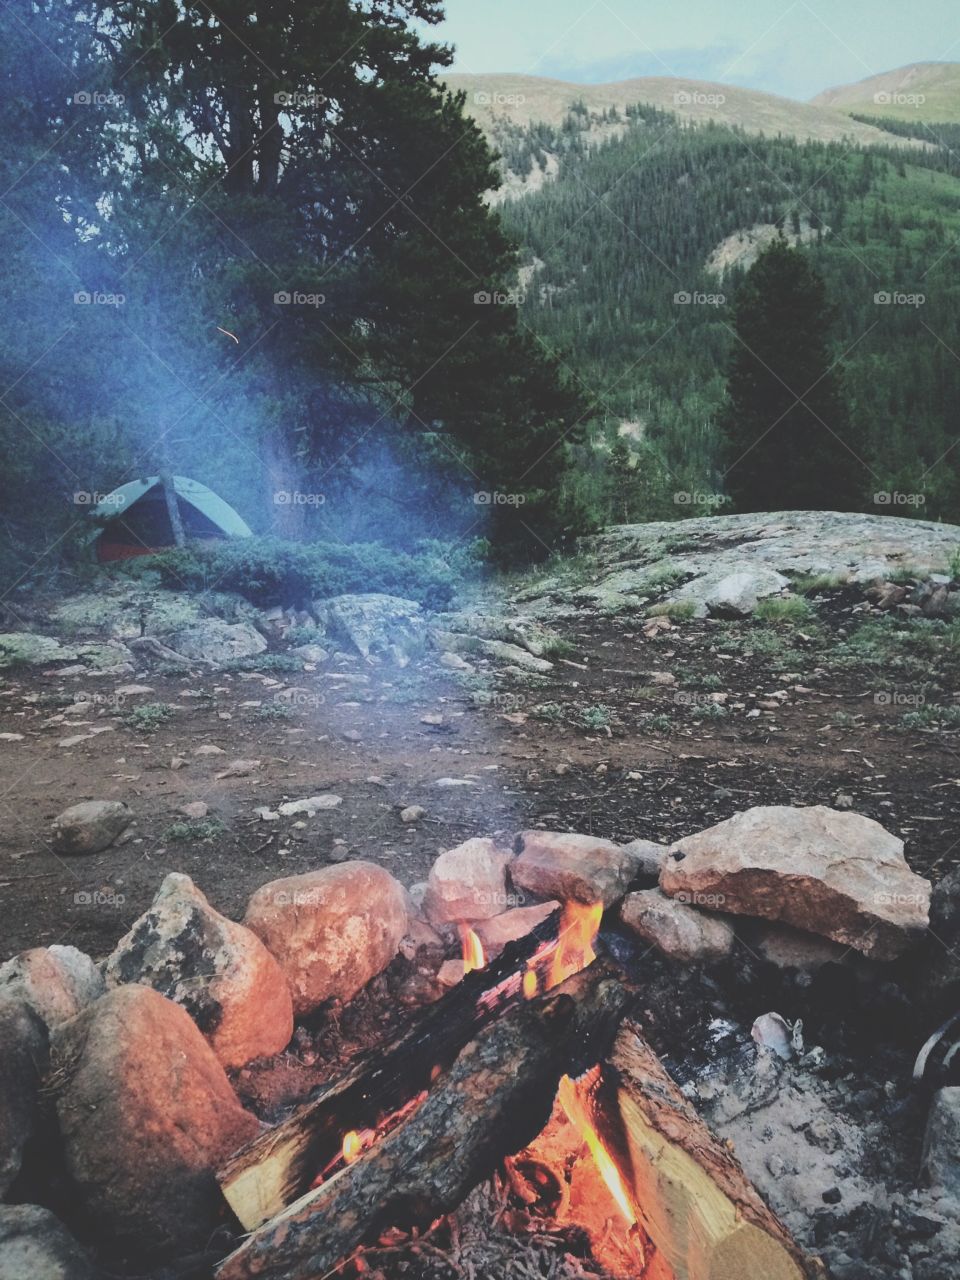 campfire lore. camping in the middle of nowhere, Colorado